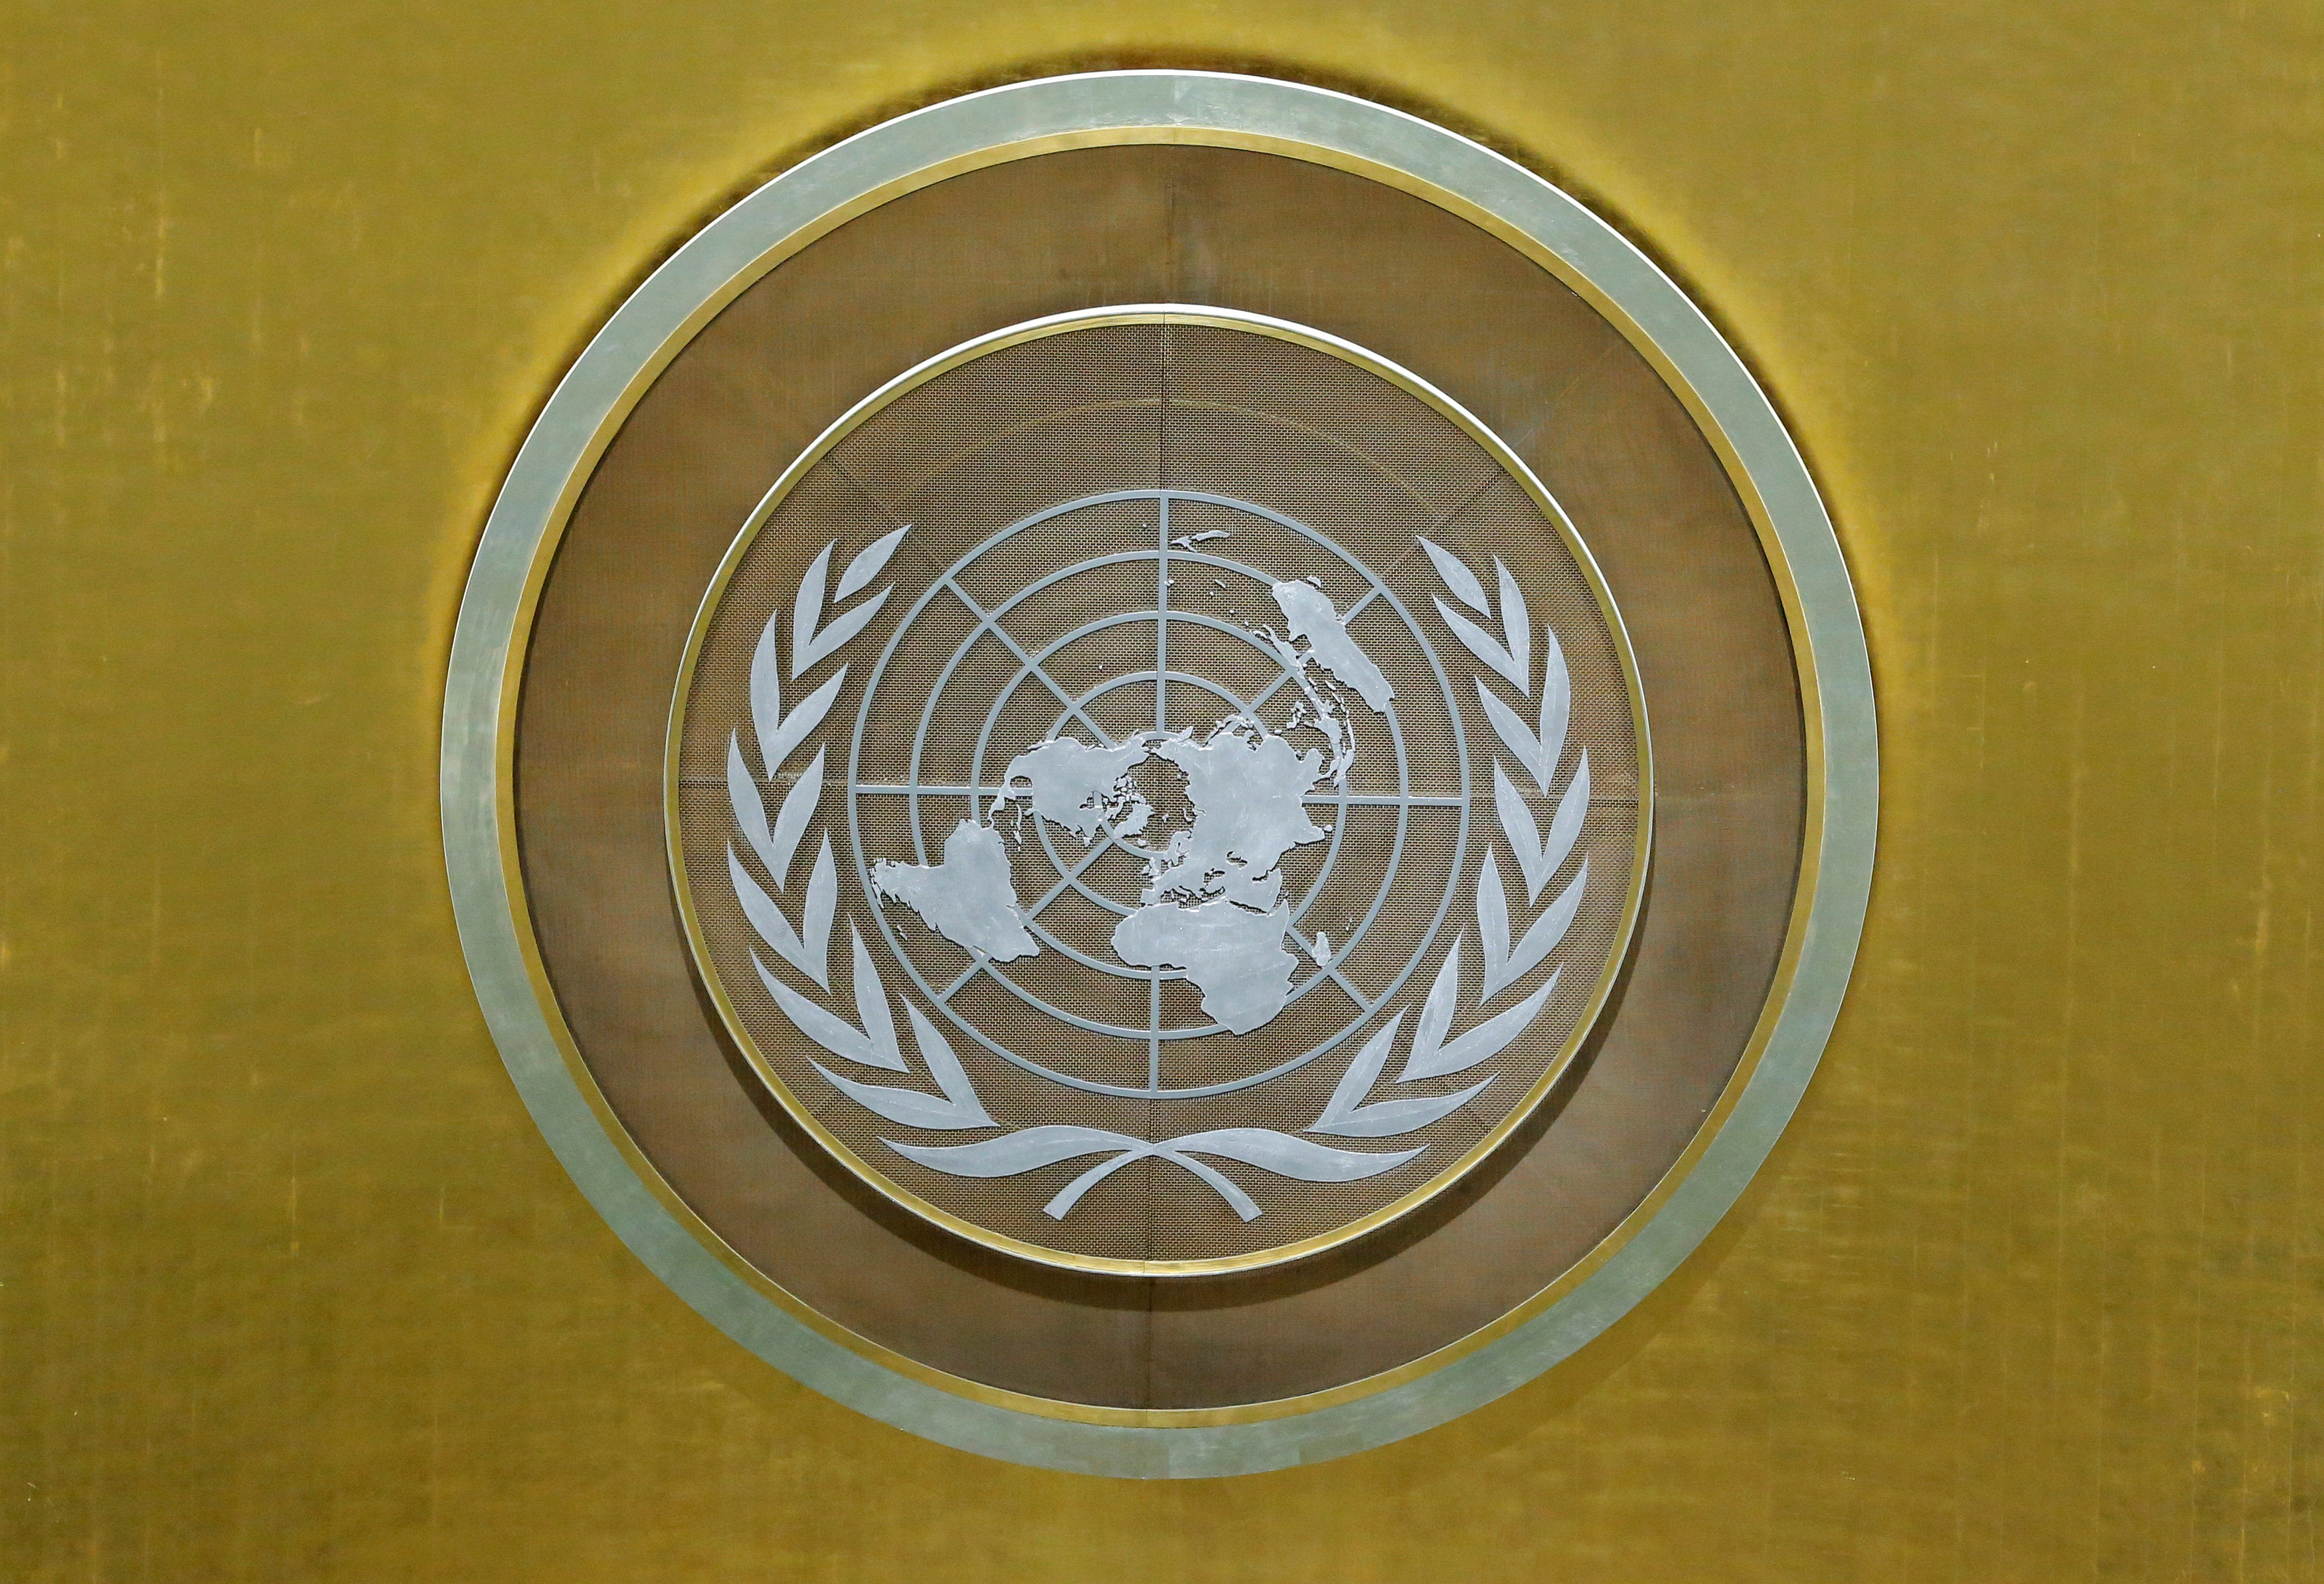 India's two-year term as the non-permanent member of the UNSC would begin from January 1, 2021. (Reuters Photo)